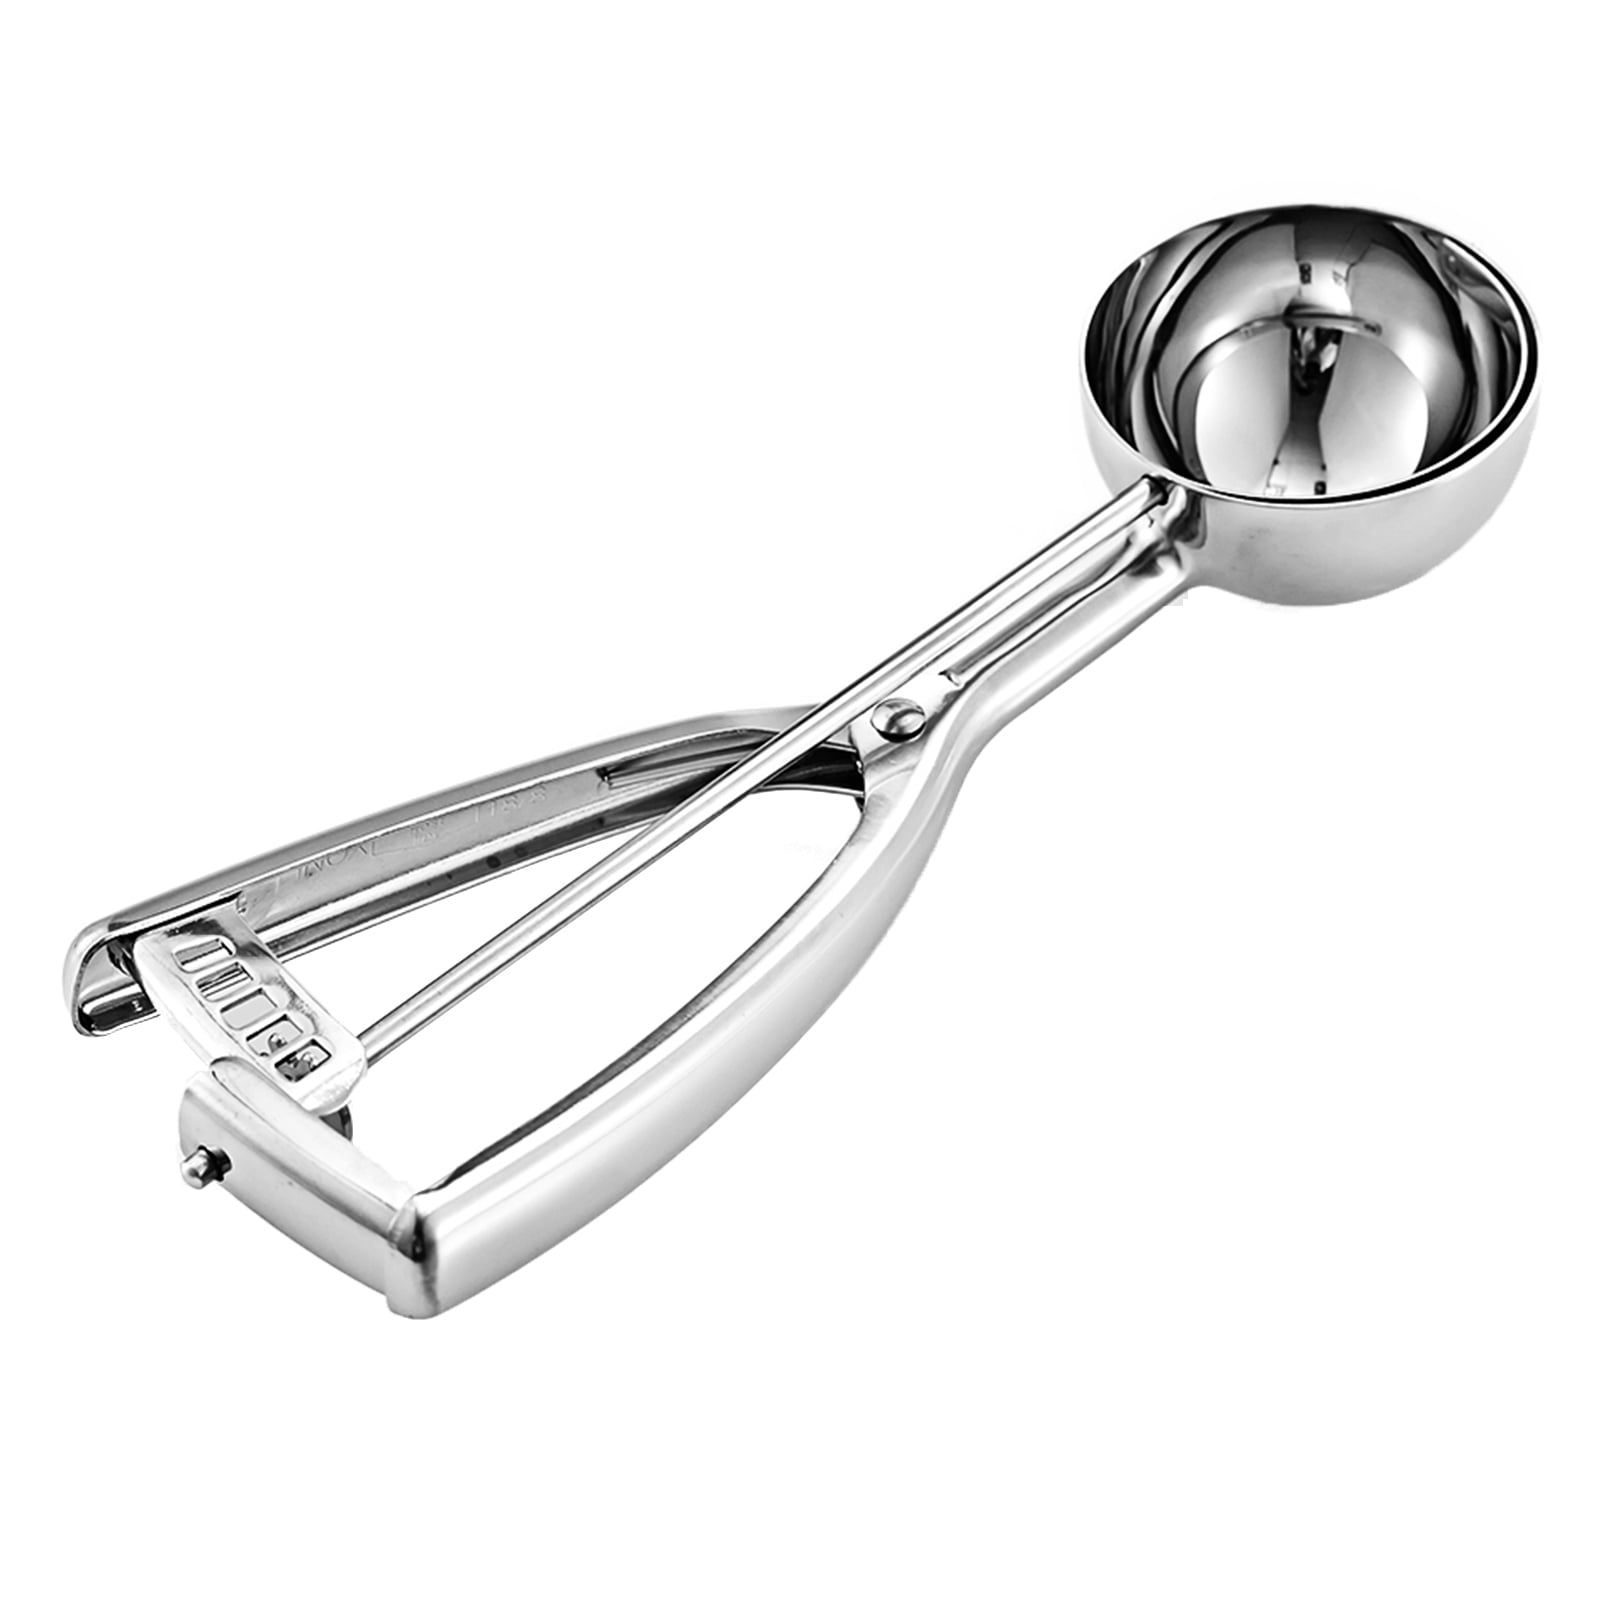 Kitchen Buddy - Versatile Cookie Scoops - Stainless Steel Ice Cream Scoop  with Trigger - For Cooking, Baking, and